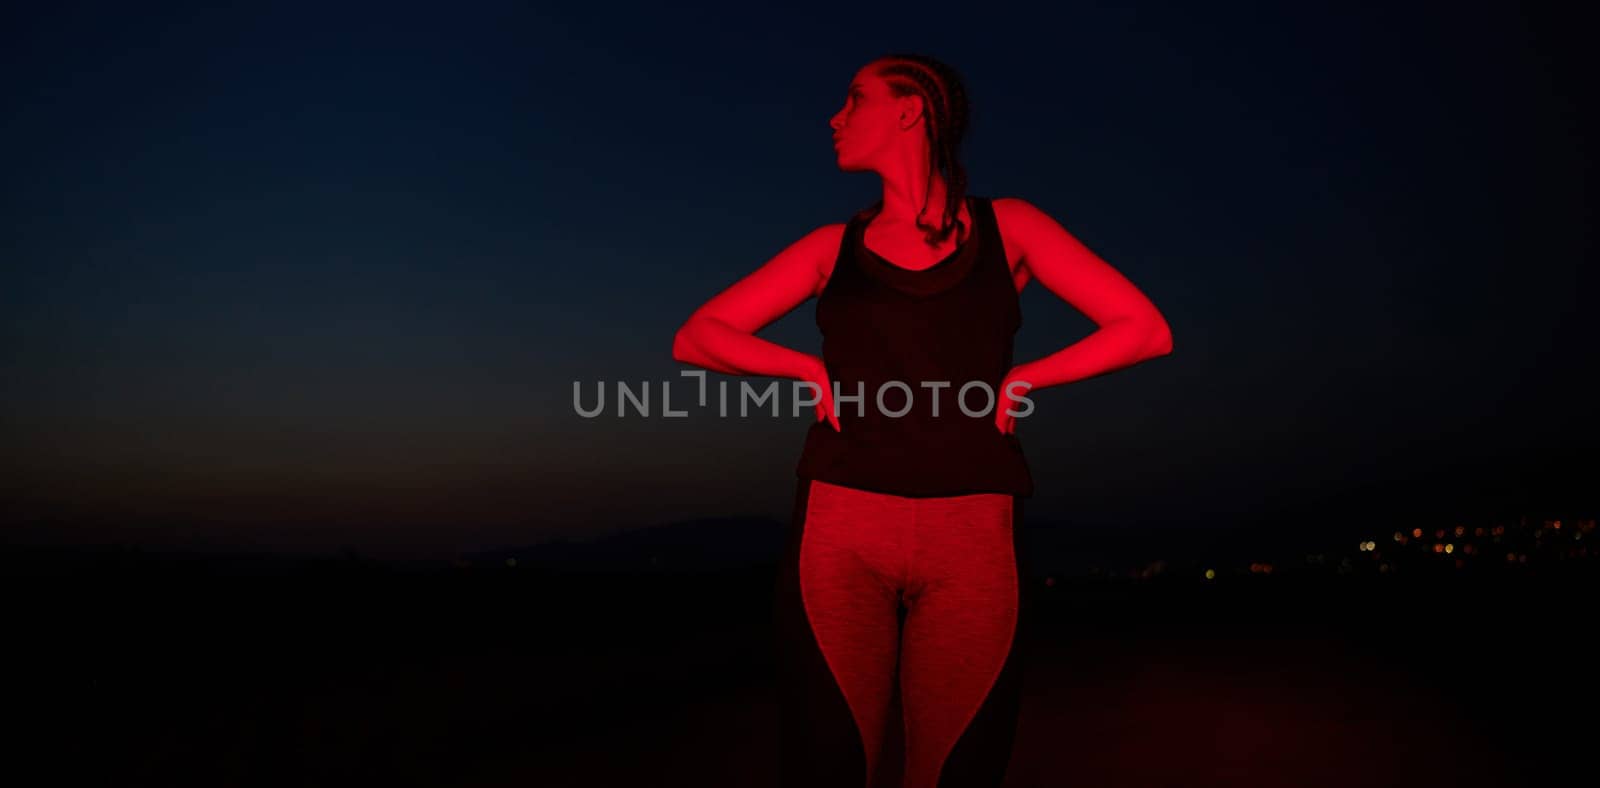 After a grueling nighttime run, an athlete strikes a confident pose, bathed in the red glow of the surroundings, showcasing both exhaustion and determination.